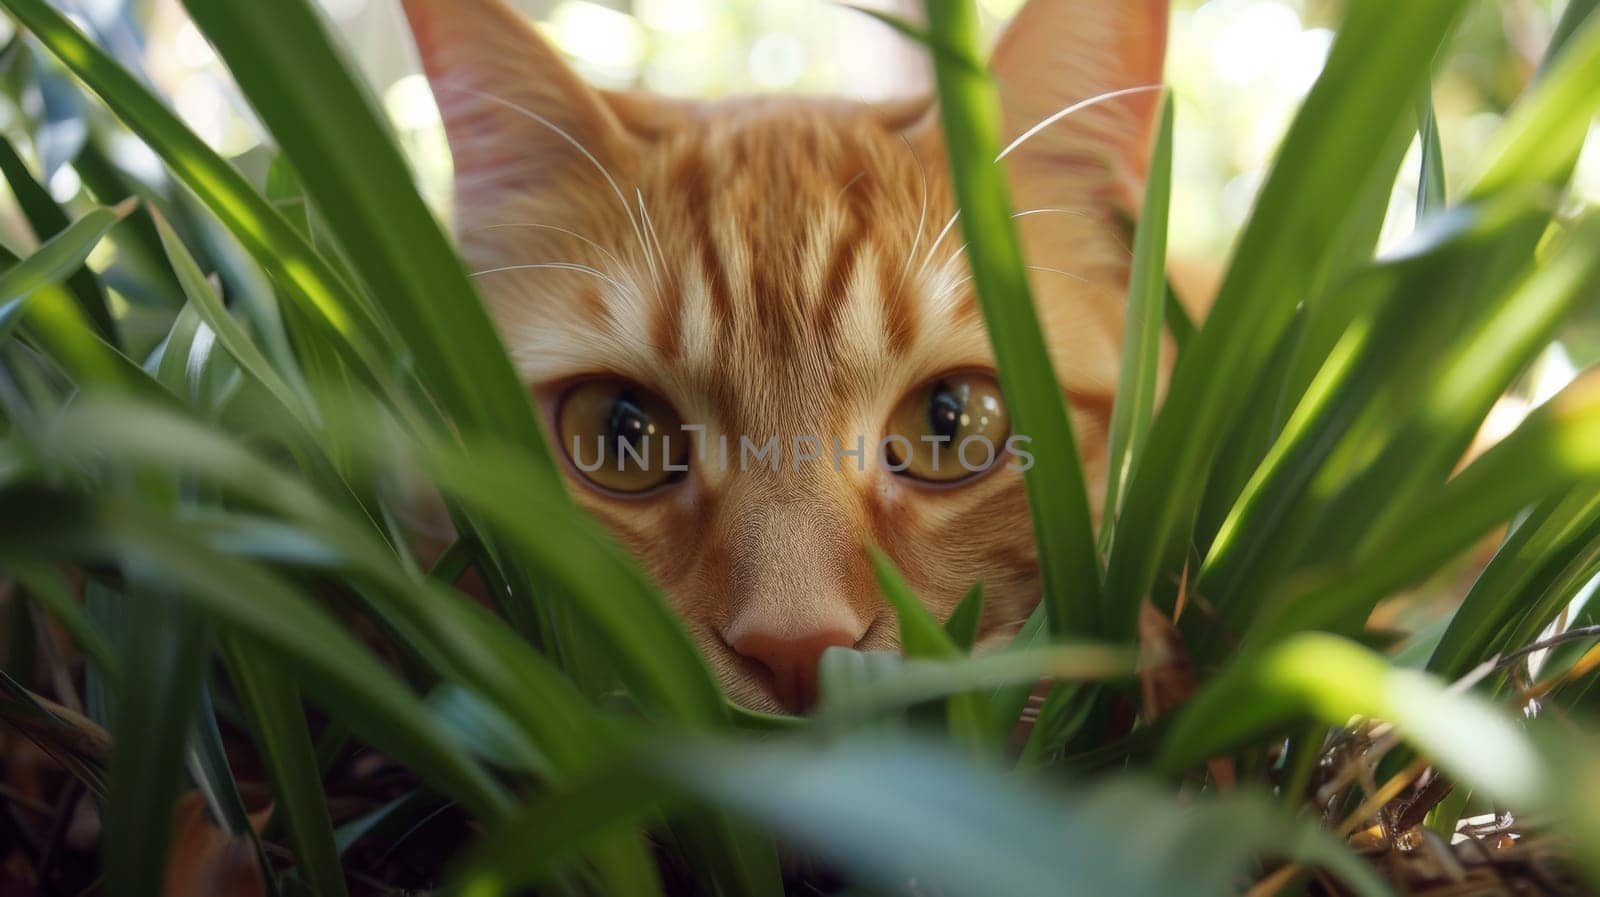 A cat peeking out from behind a bunch of green grass, AI by starush